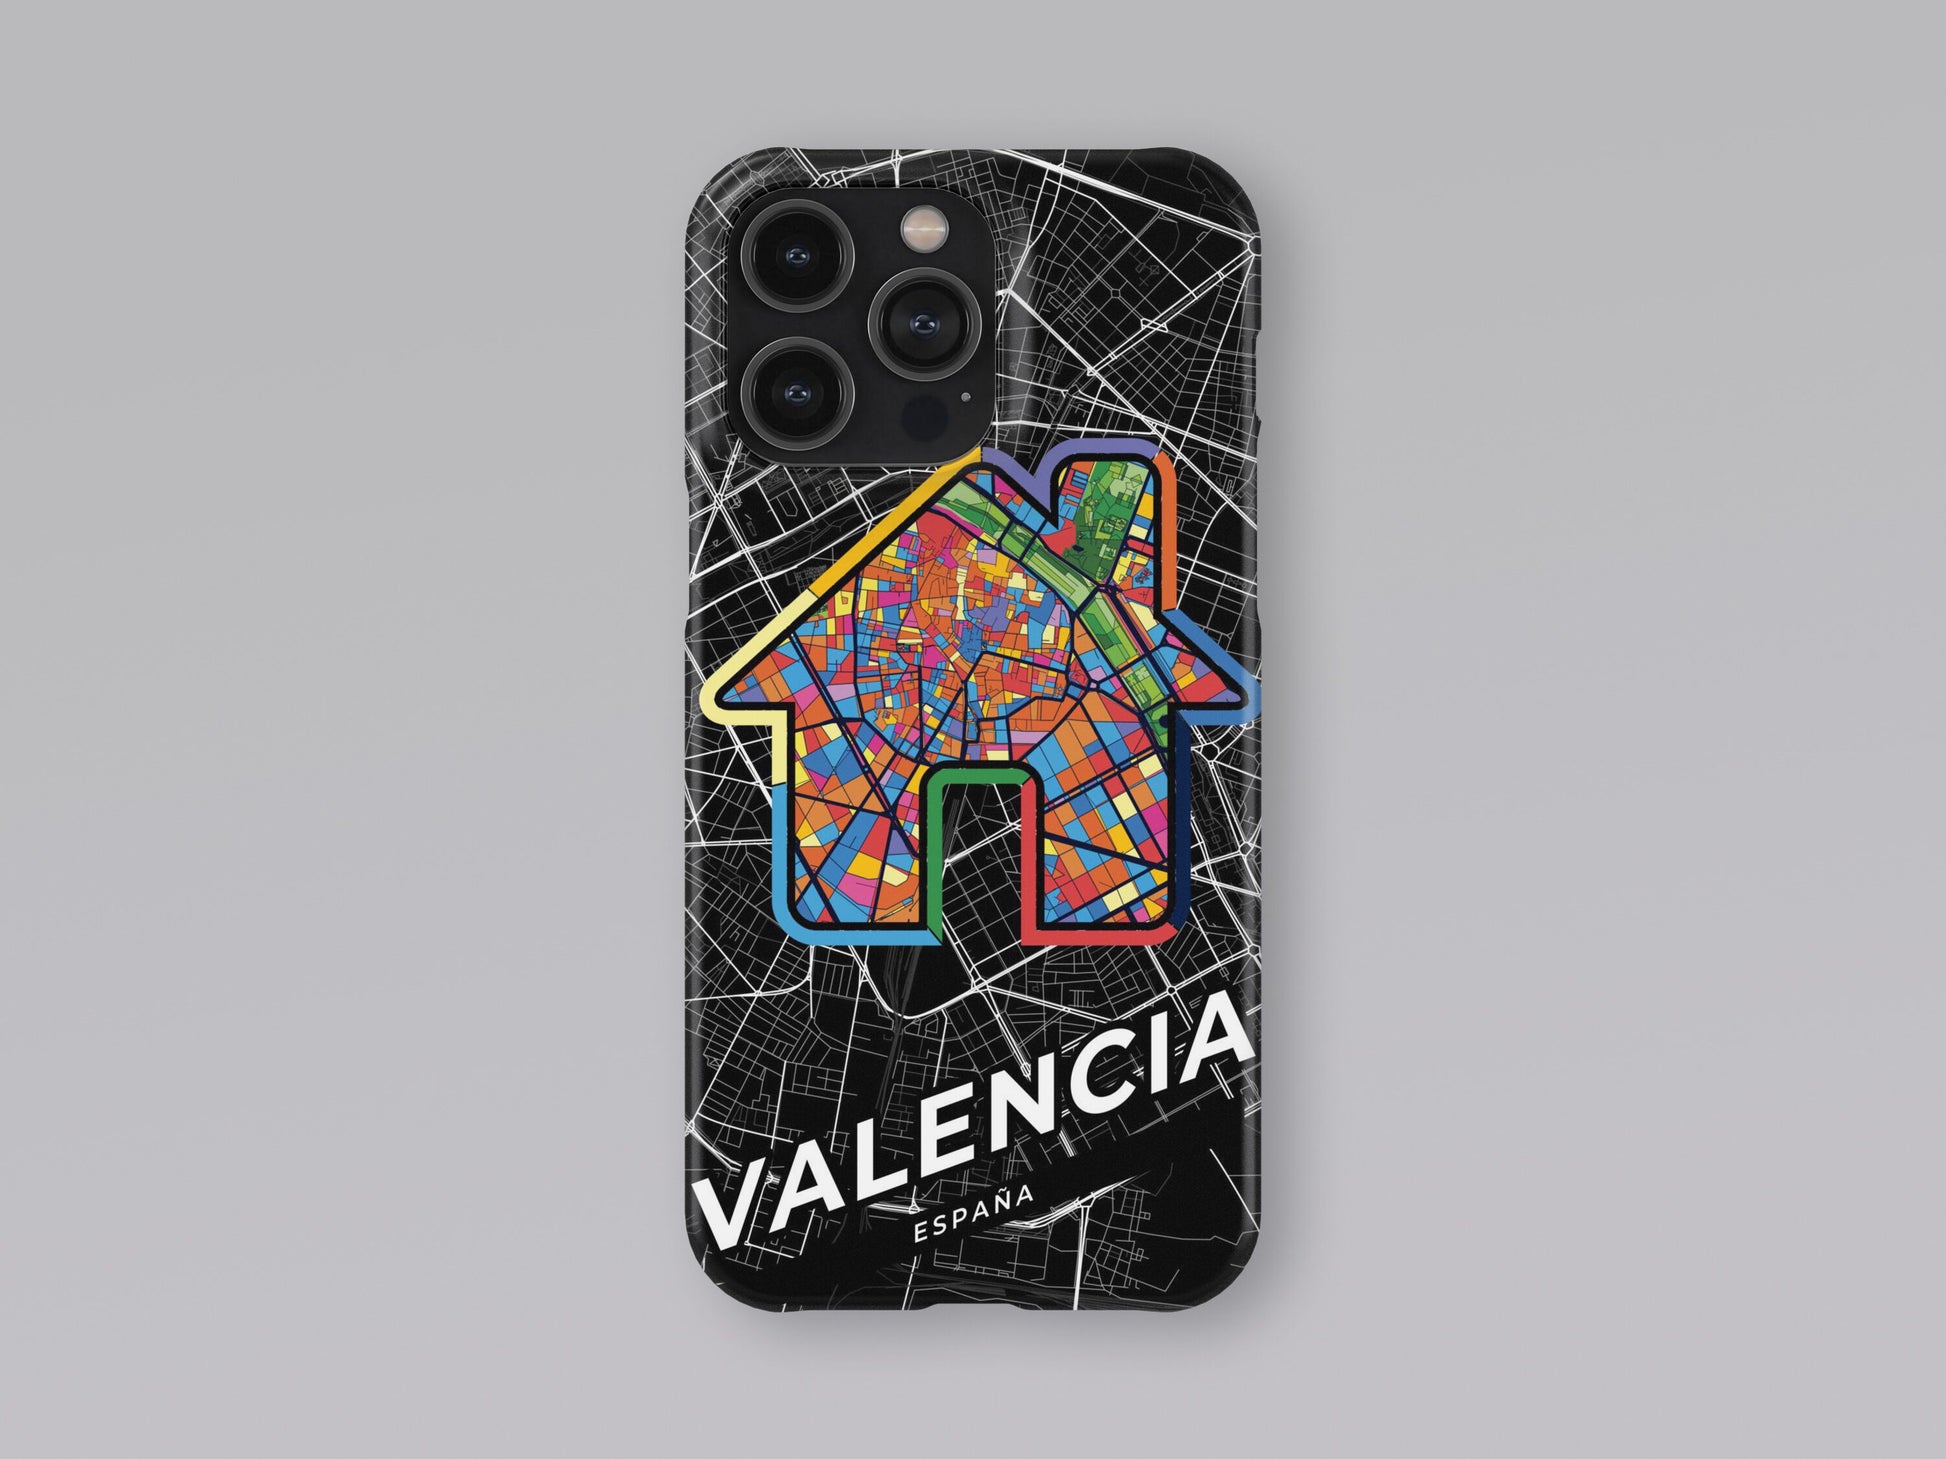 Valencia Spain slim phone case with colorful icon 3